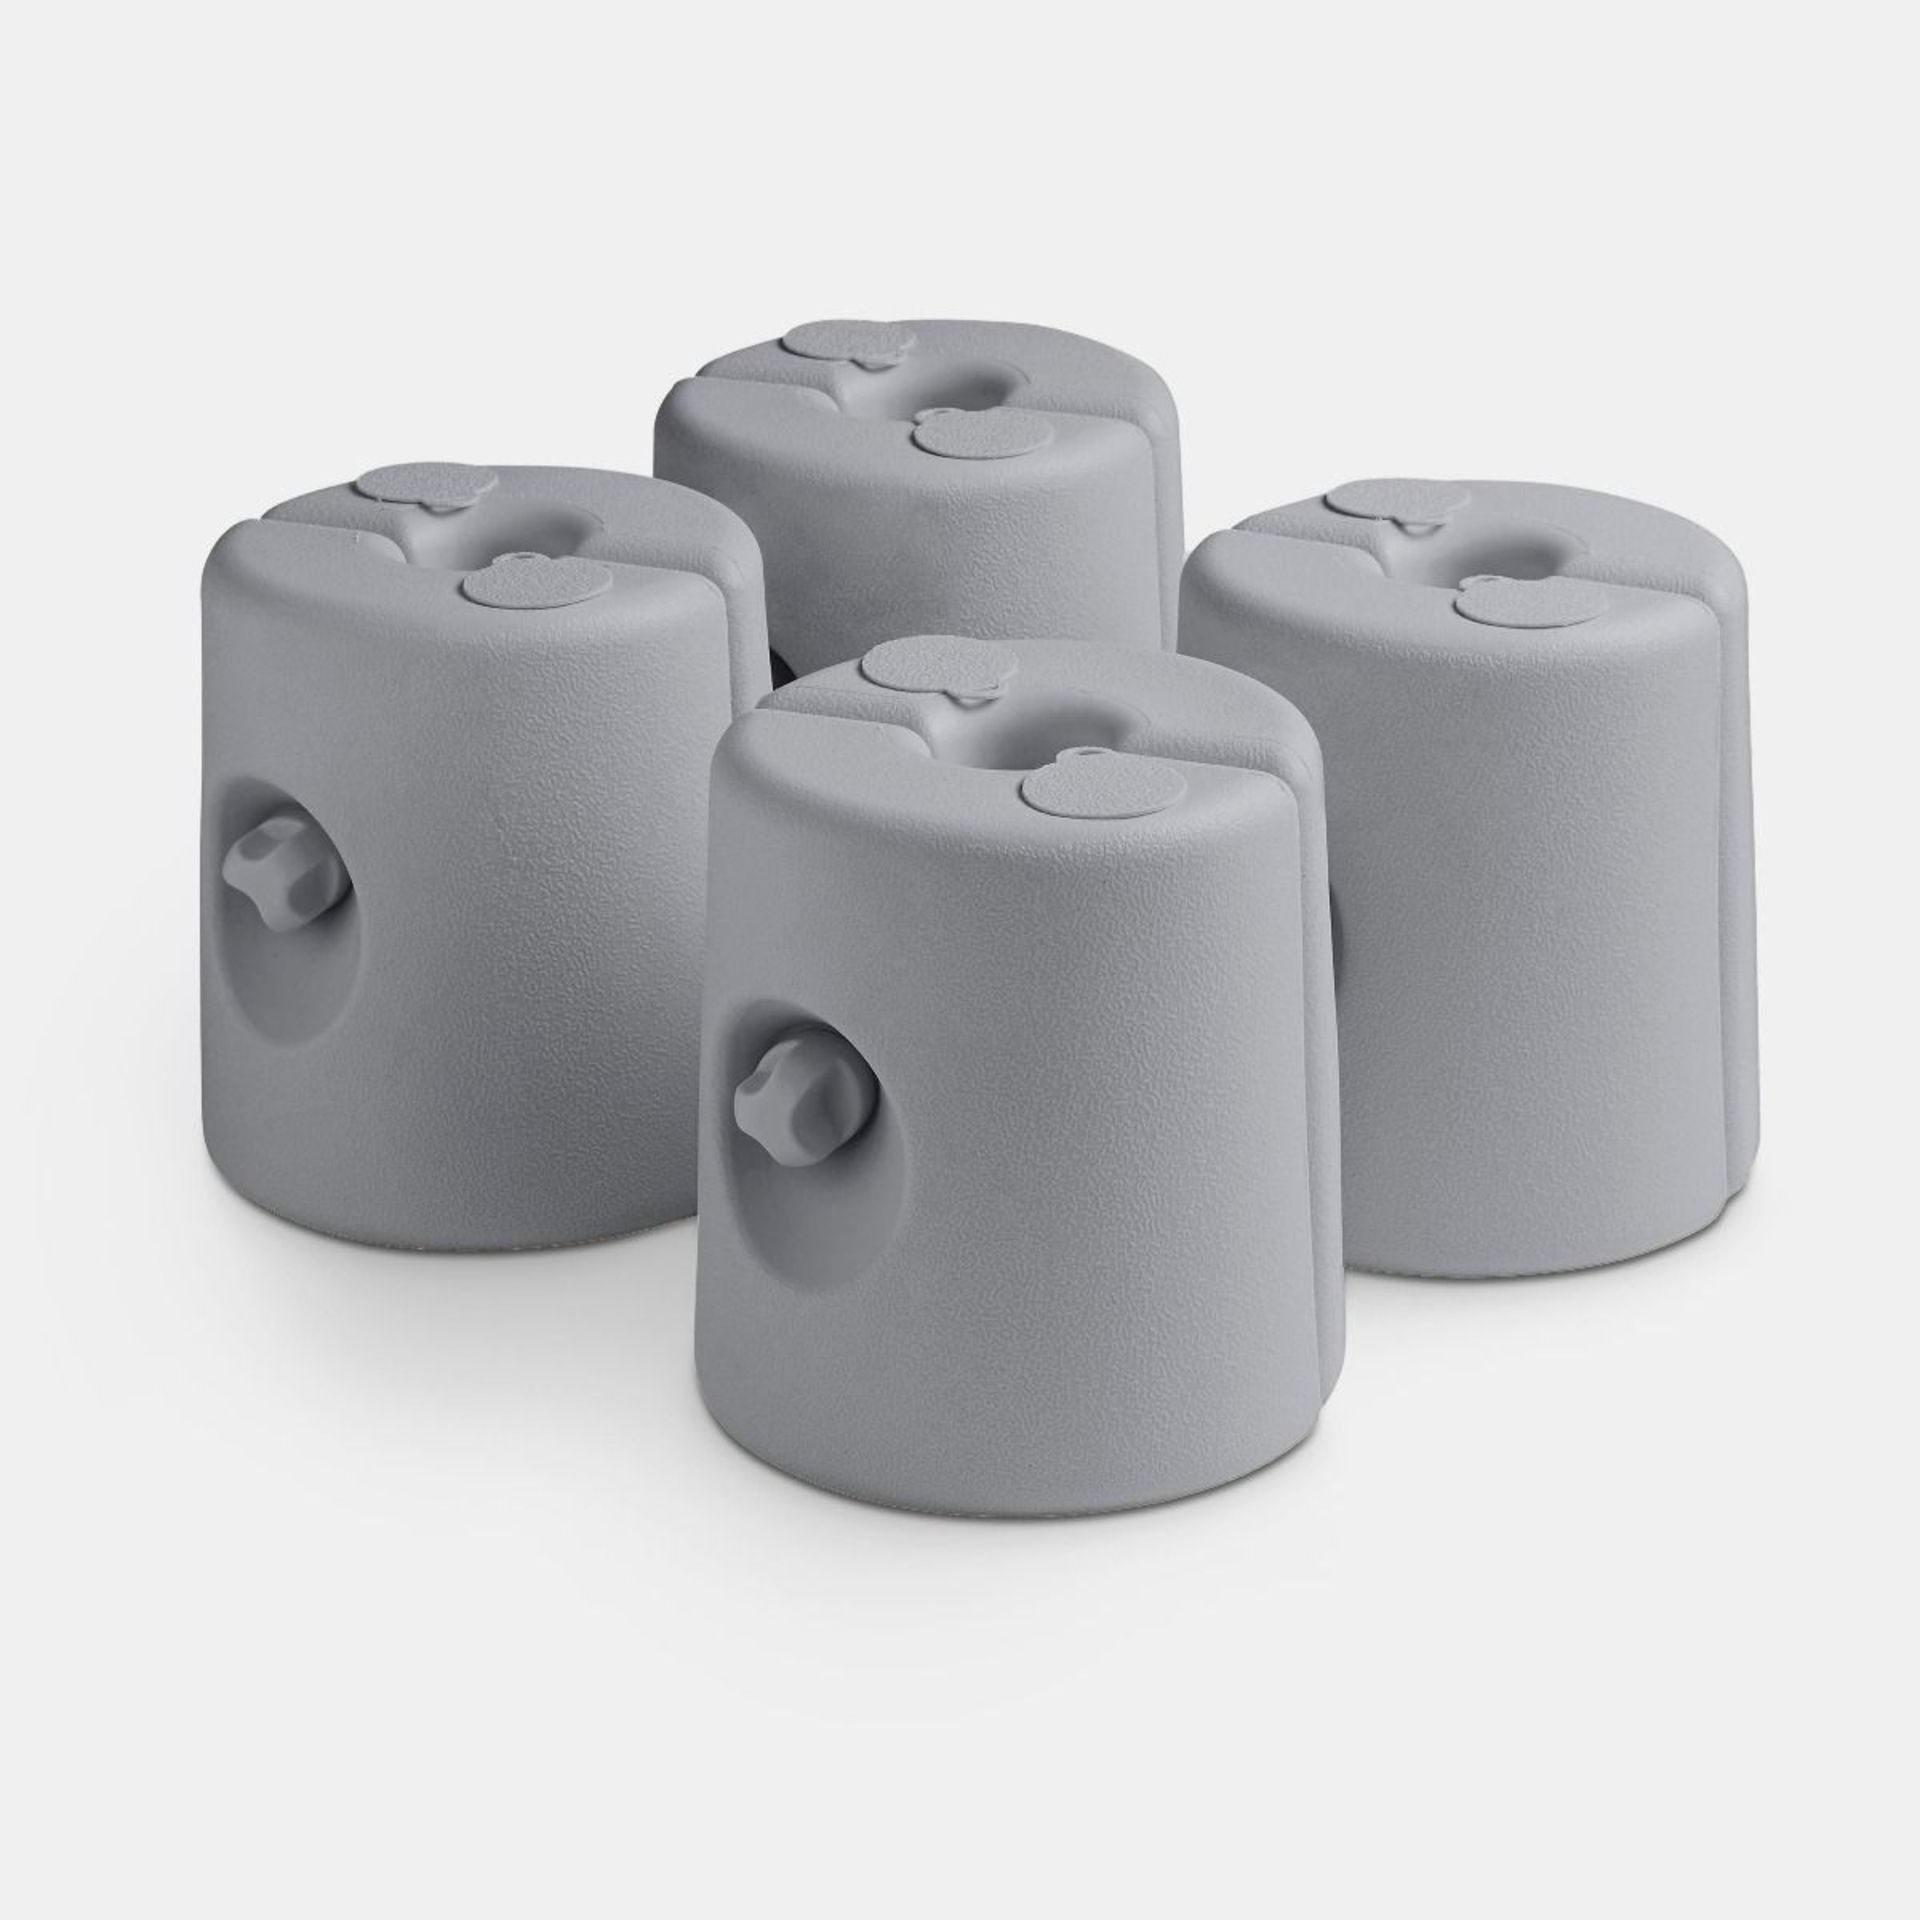 Gazebo Weights. - BW. When camping or having an outdoor get-together, there’s nothing more